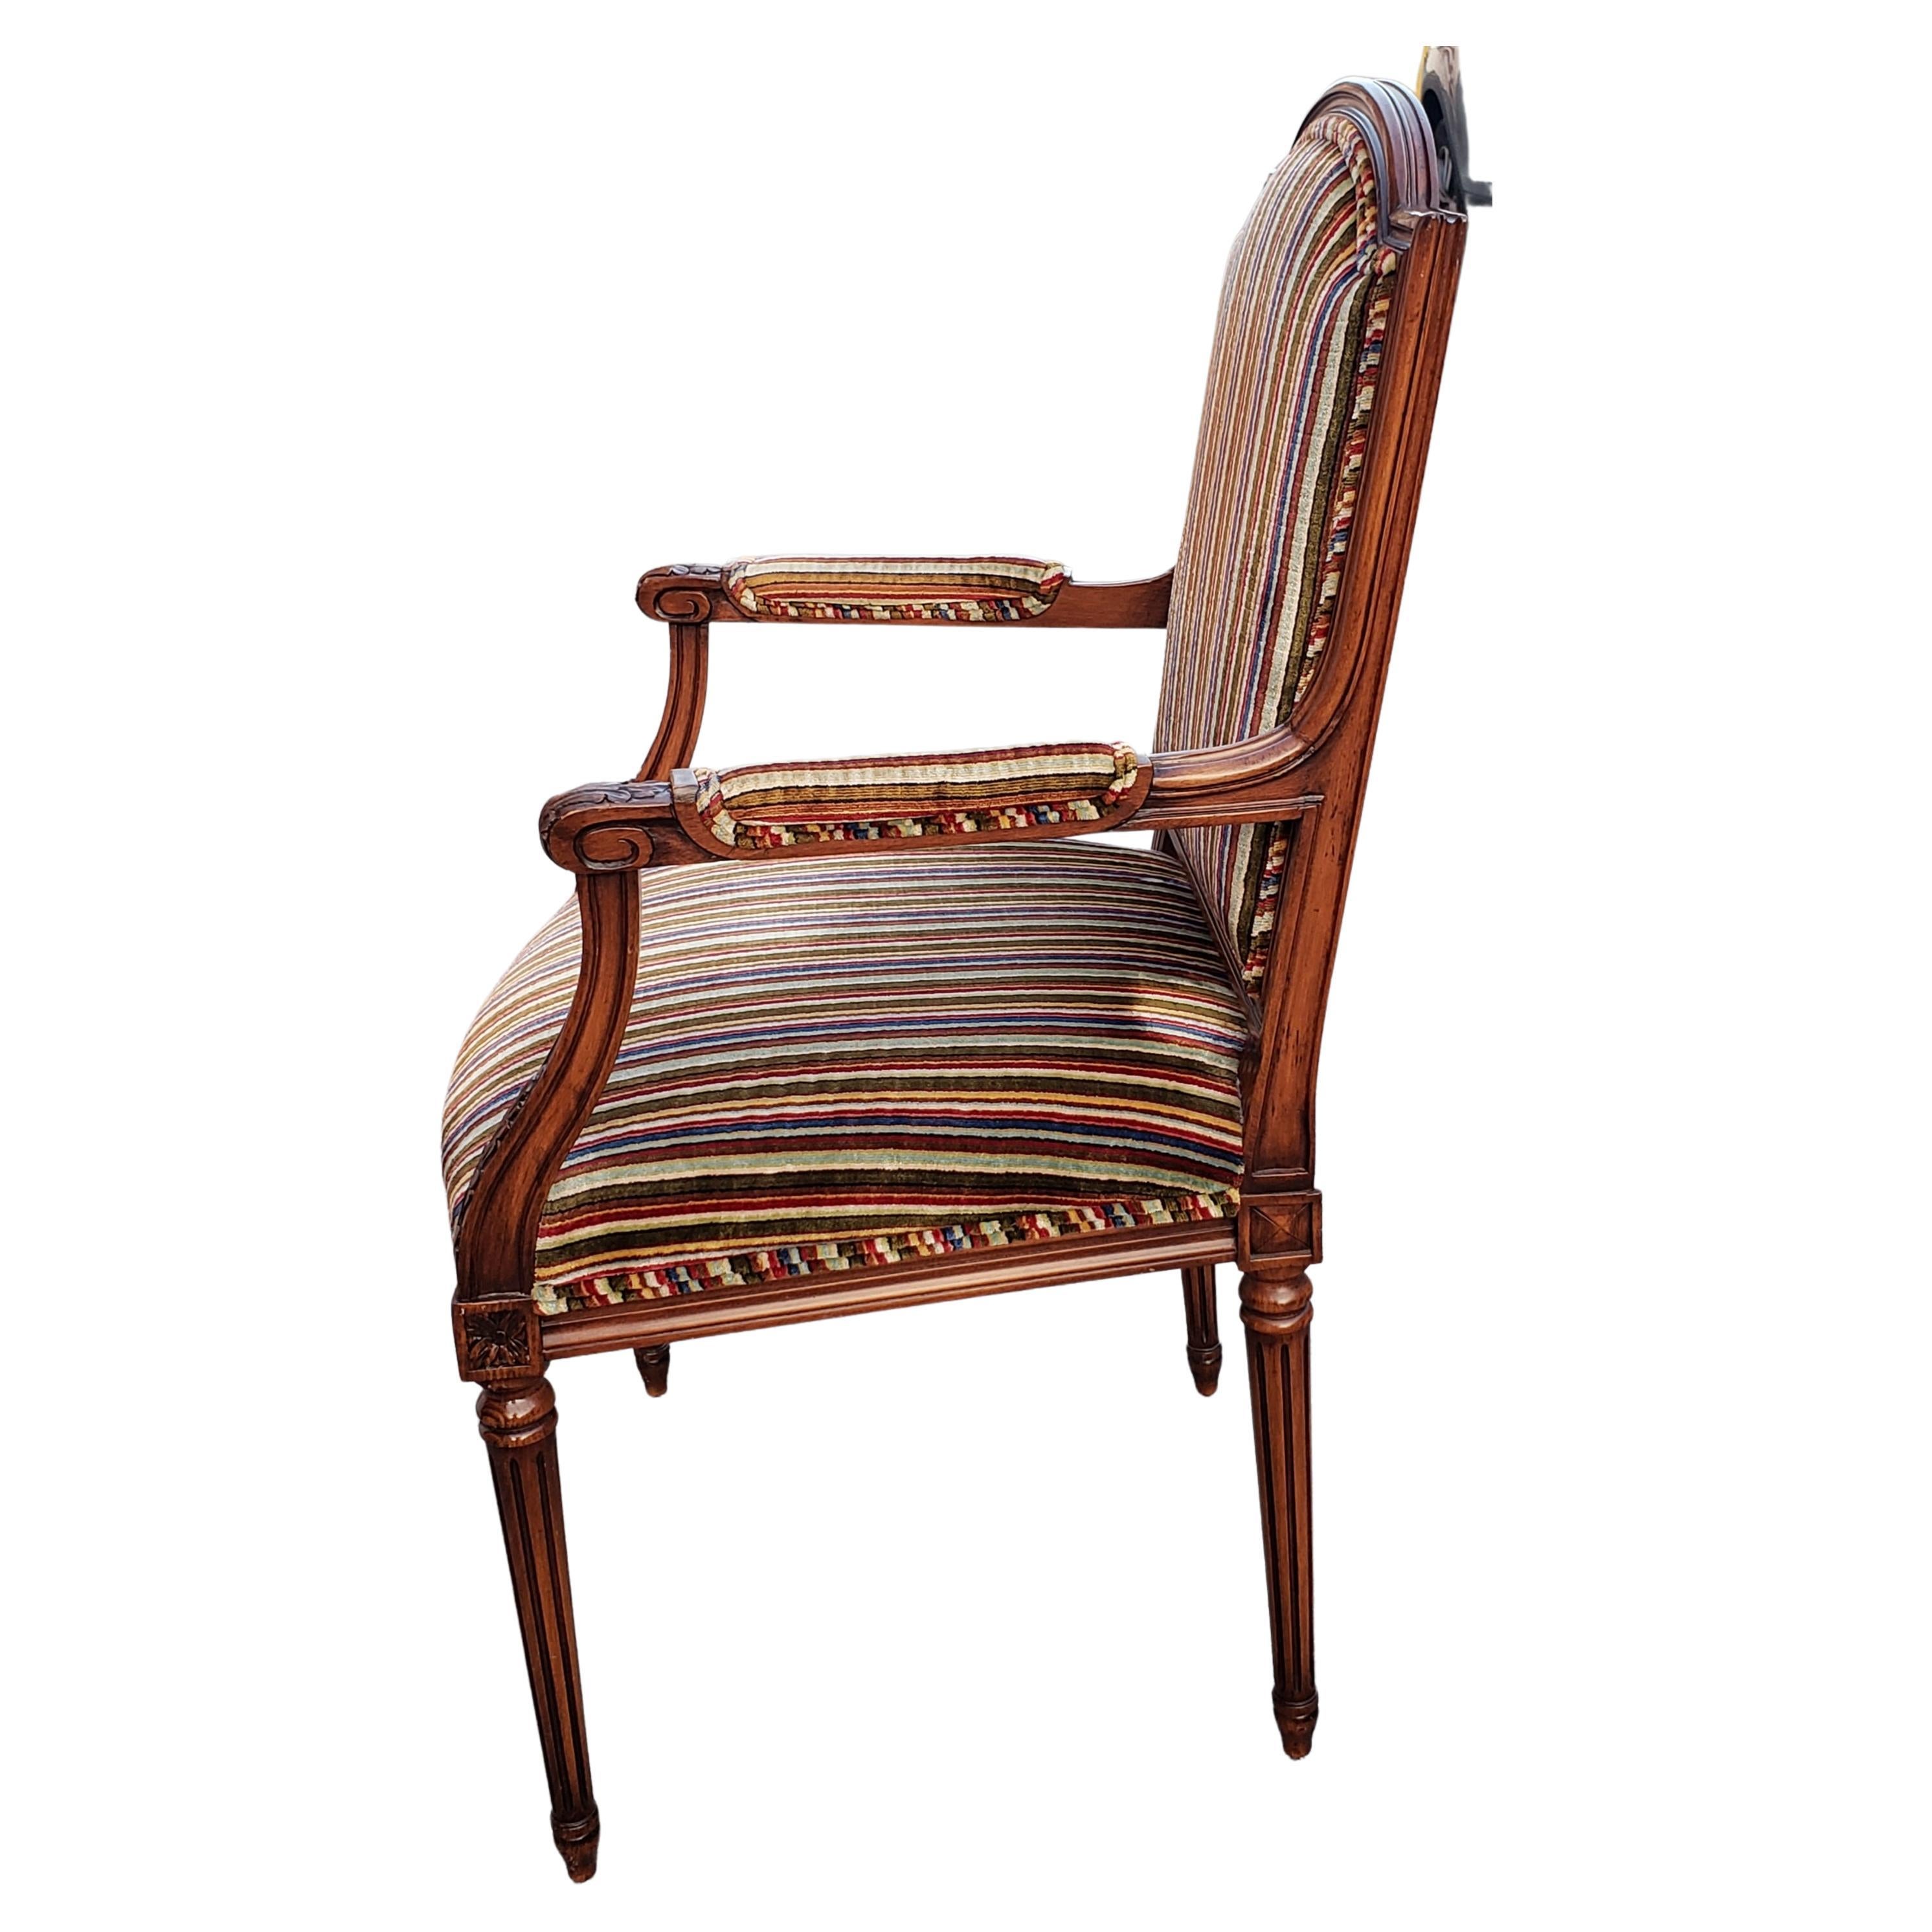 American Louis XVI Style Carved Mahogany Striped Upholstered Arm Chair For Sale